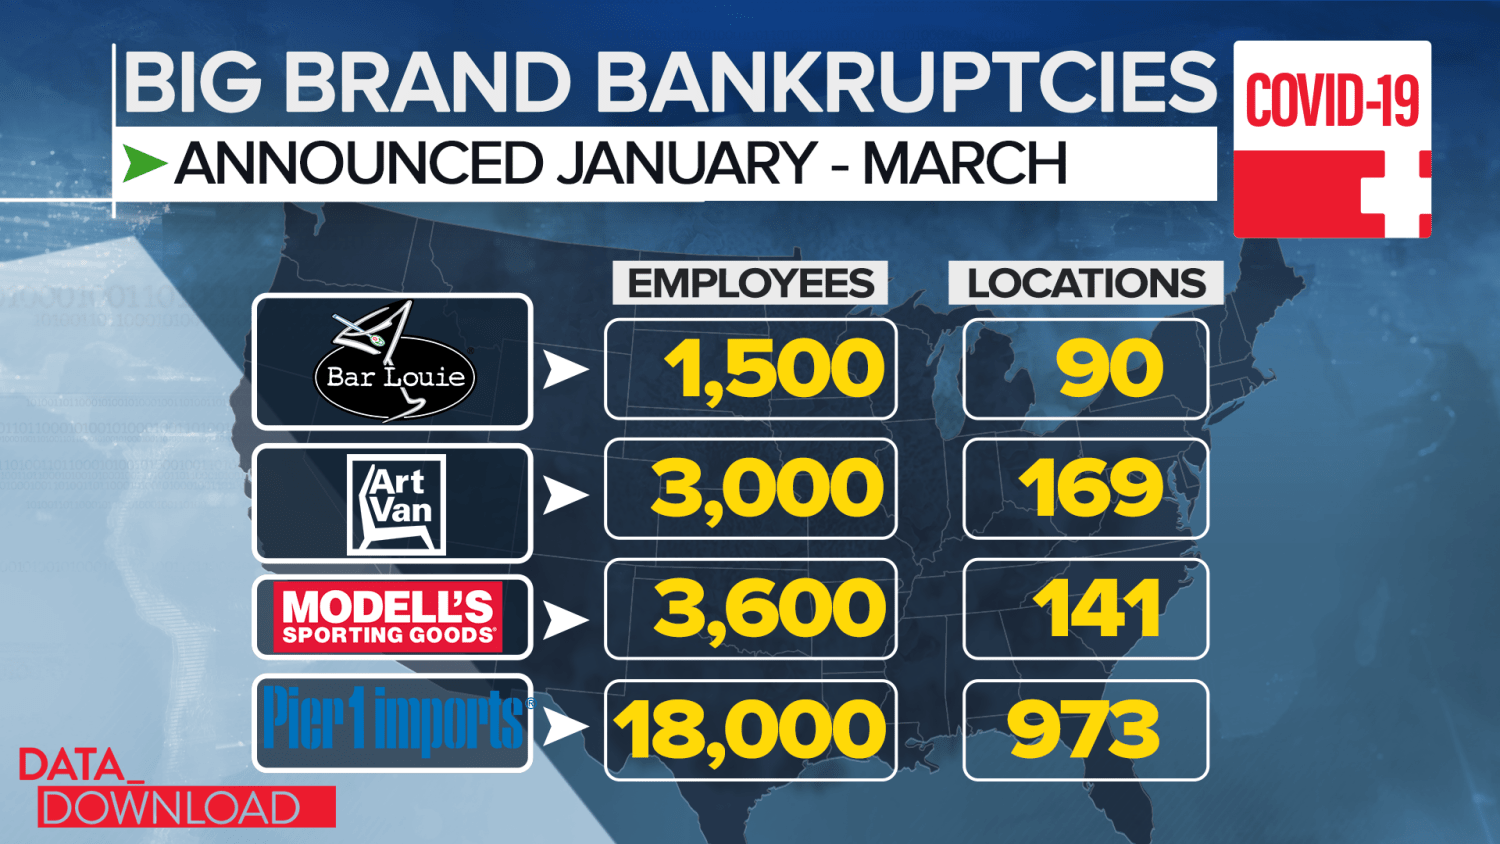 Lucky Brand Files for Bankruptcy After Pandemic Forces Closures